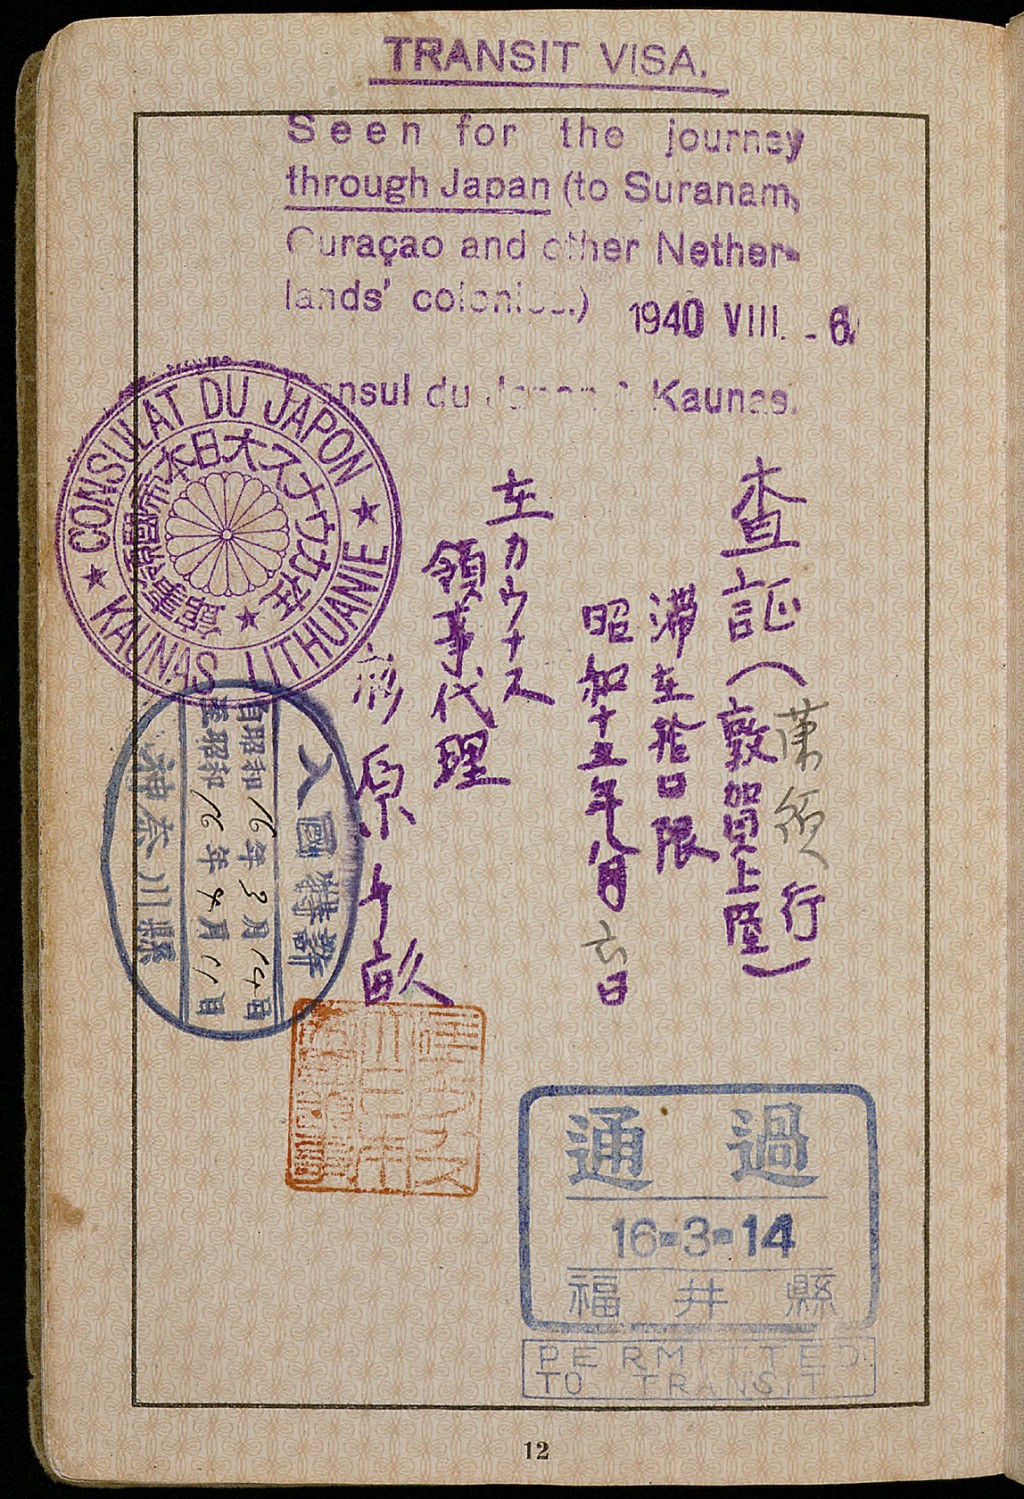 Page 12 of passport issued to Setty Sondheimer